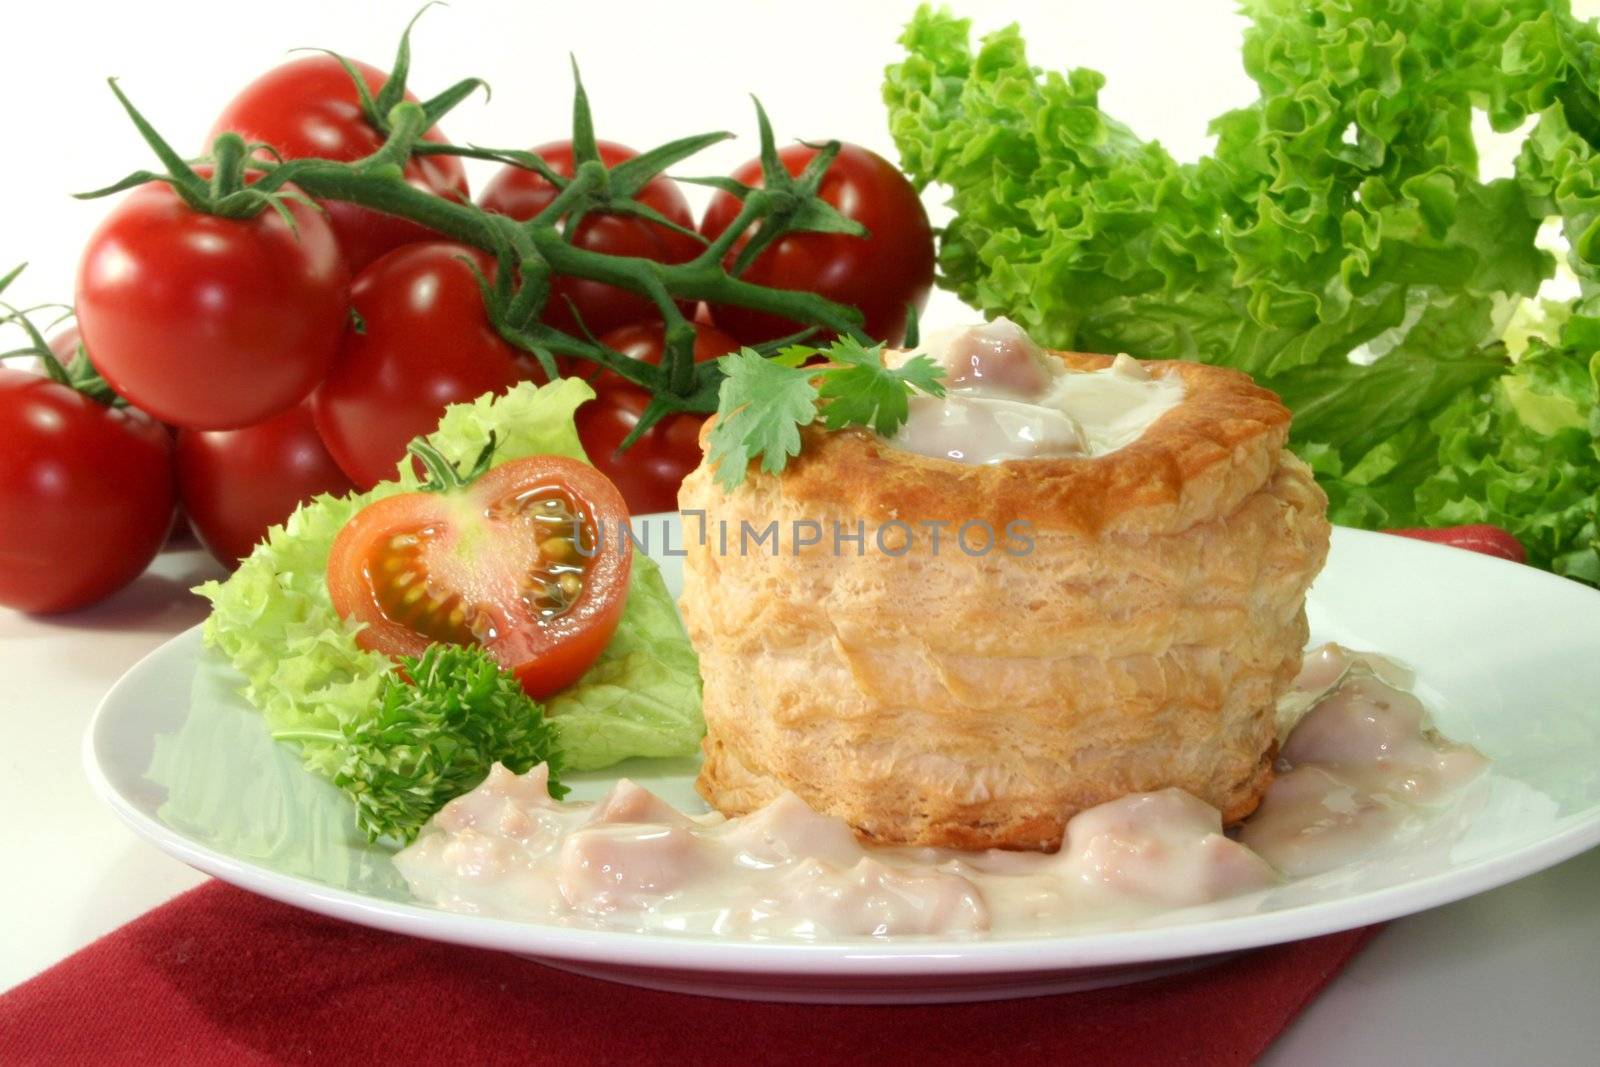 Queen pie filled with meat sauce and fresh herbs